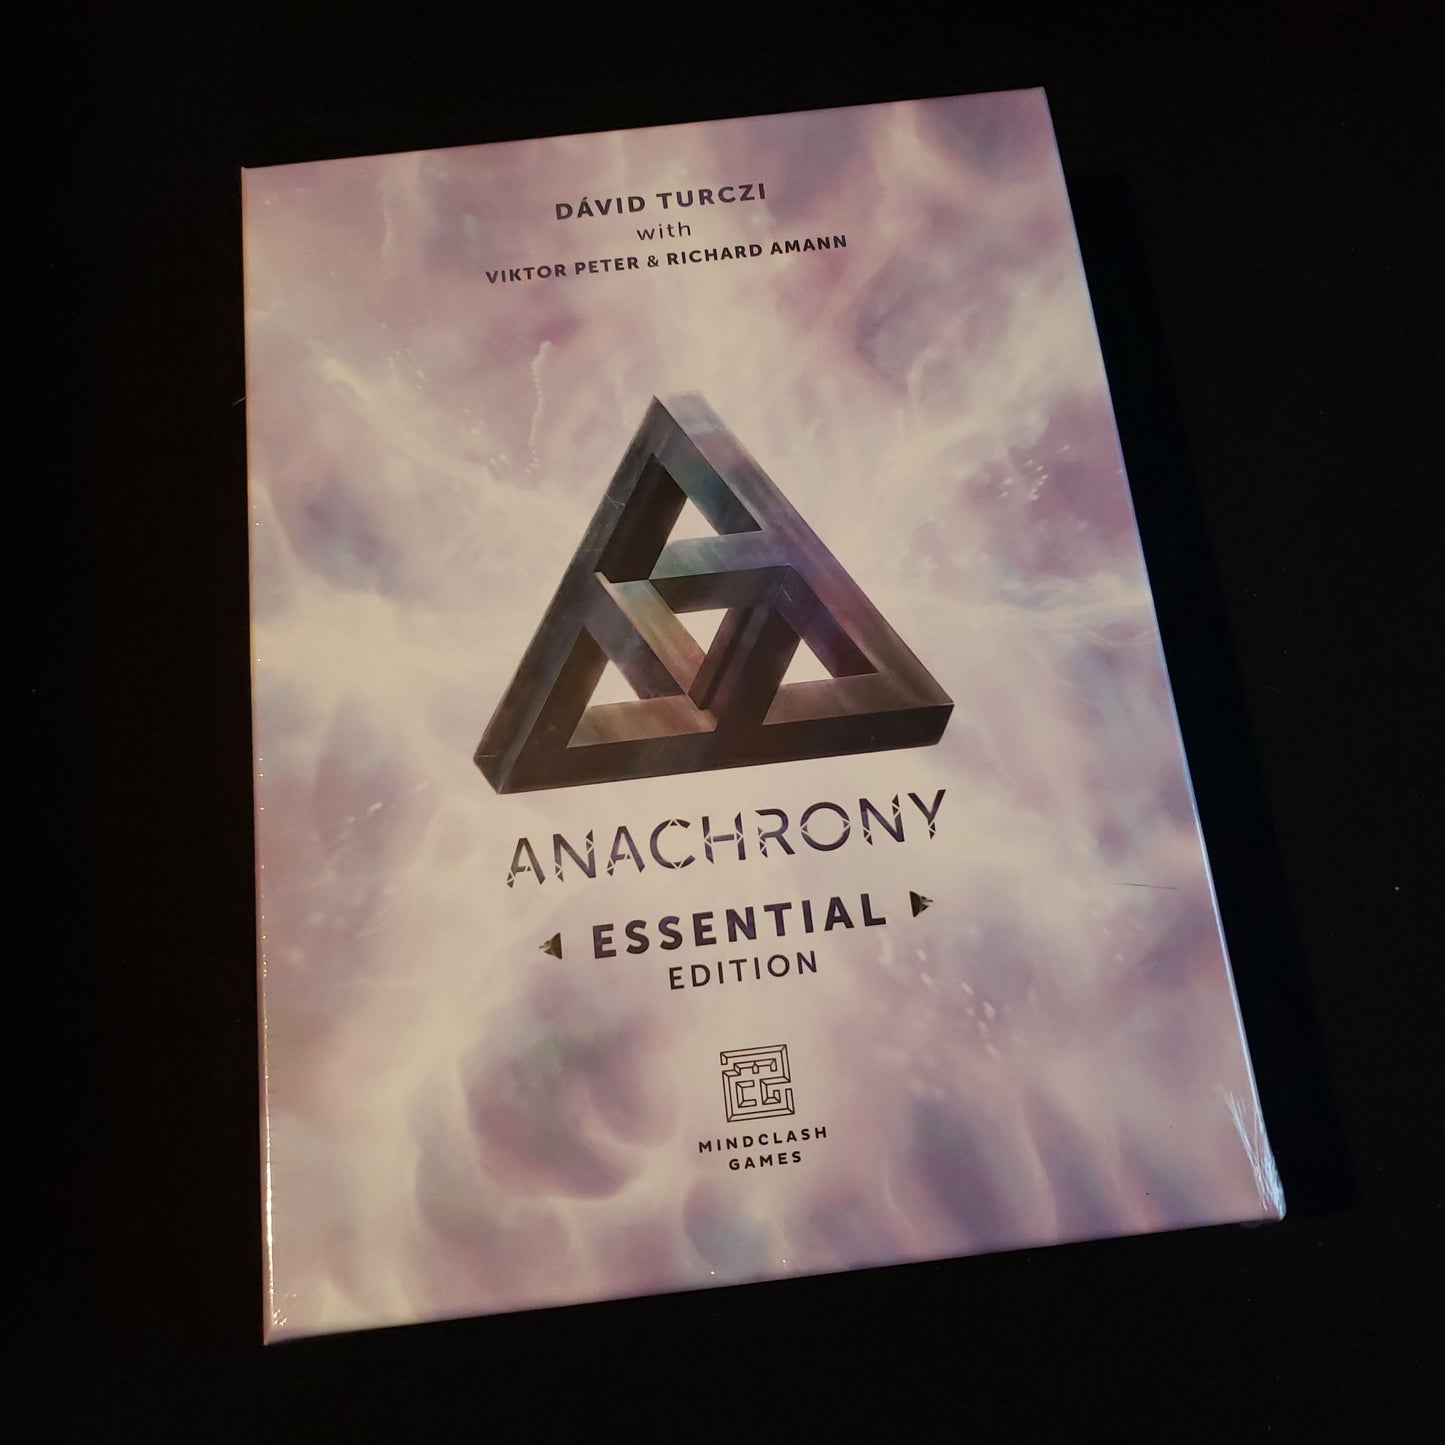 Image shows the front cover of the box of the Anachrony: Essential Edition board game